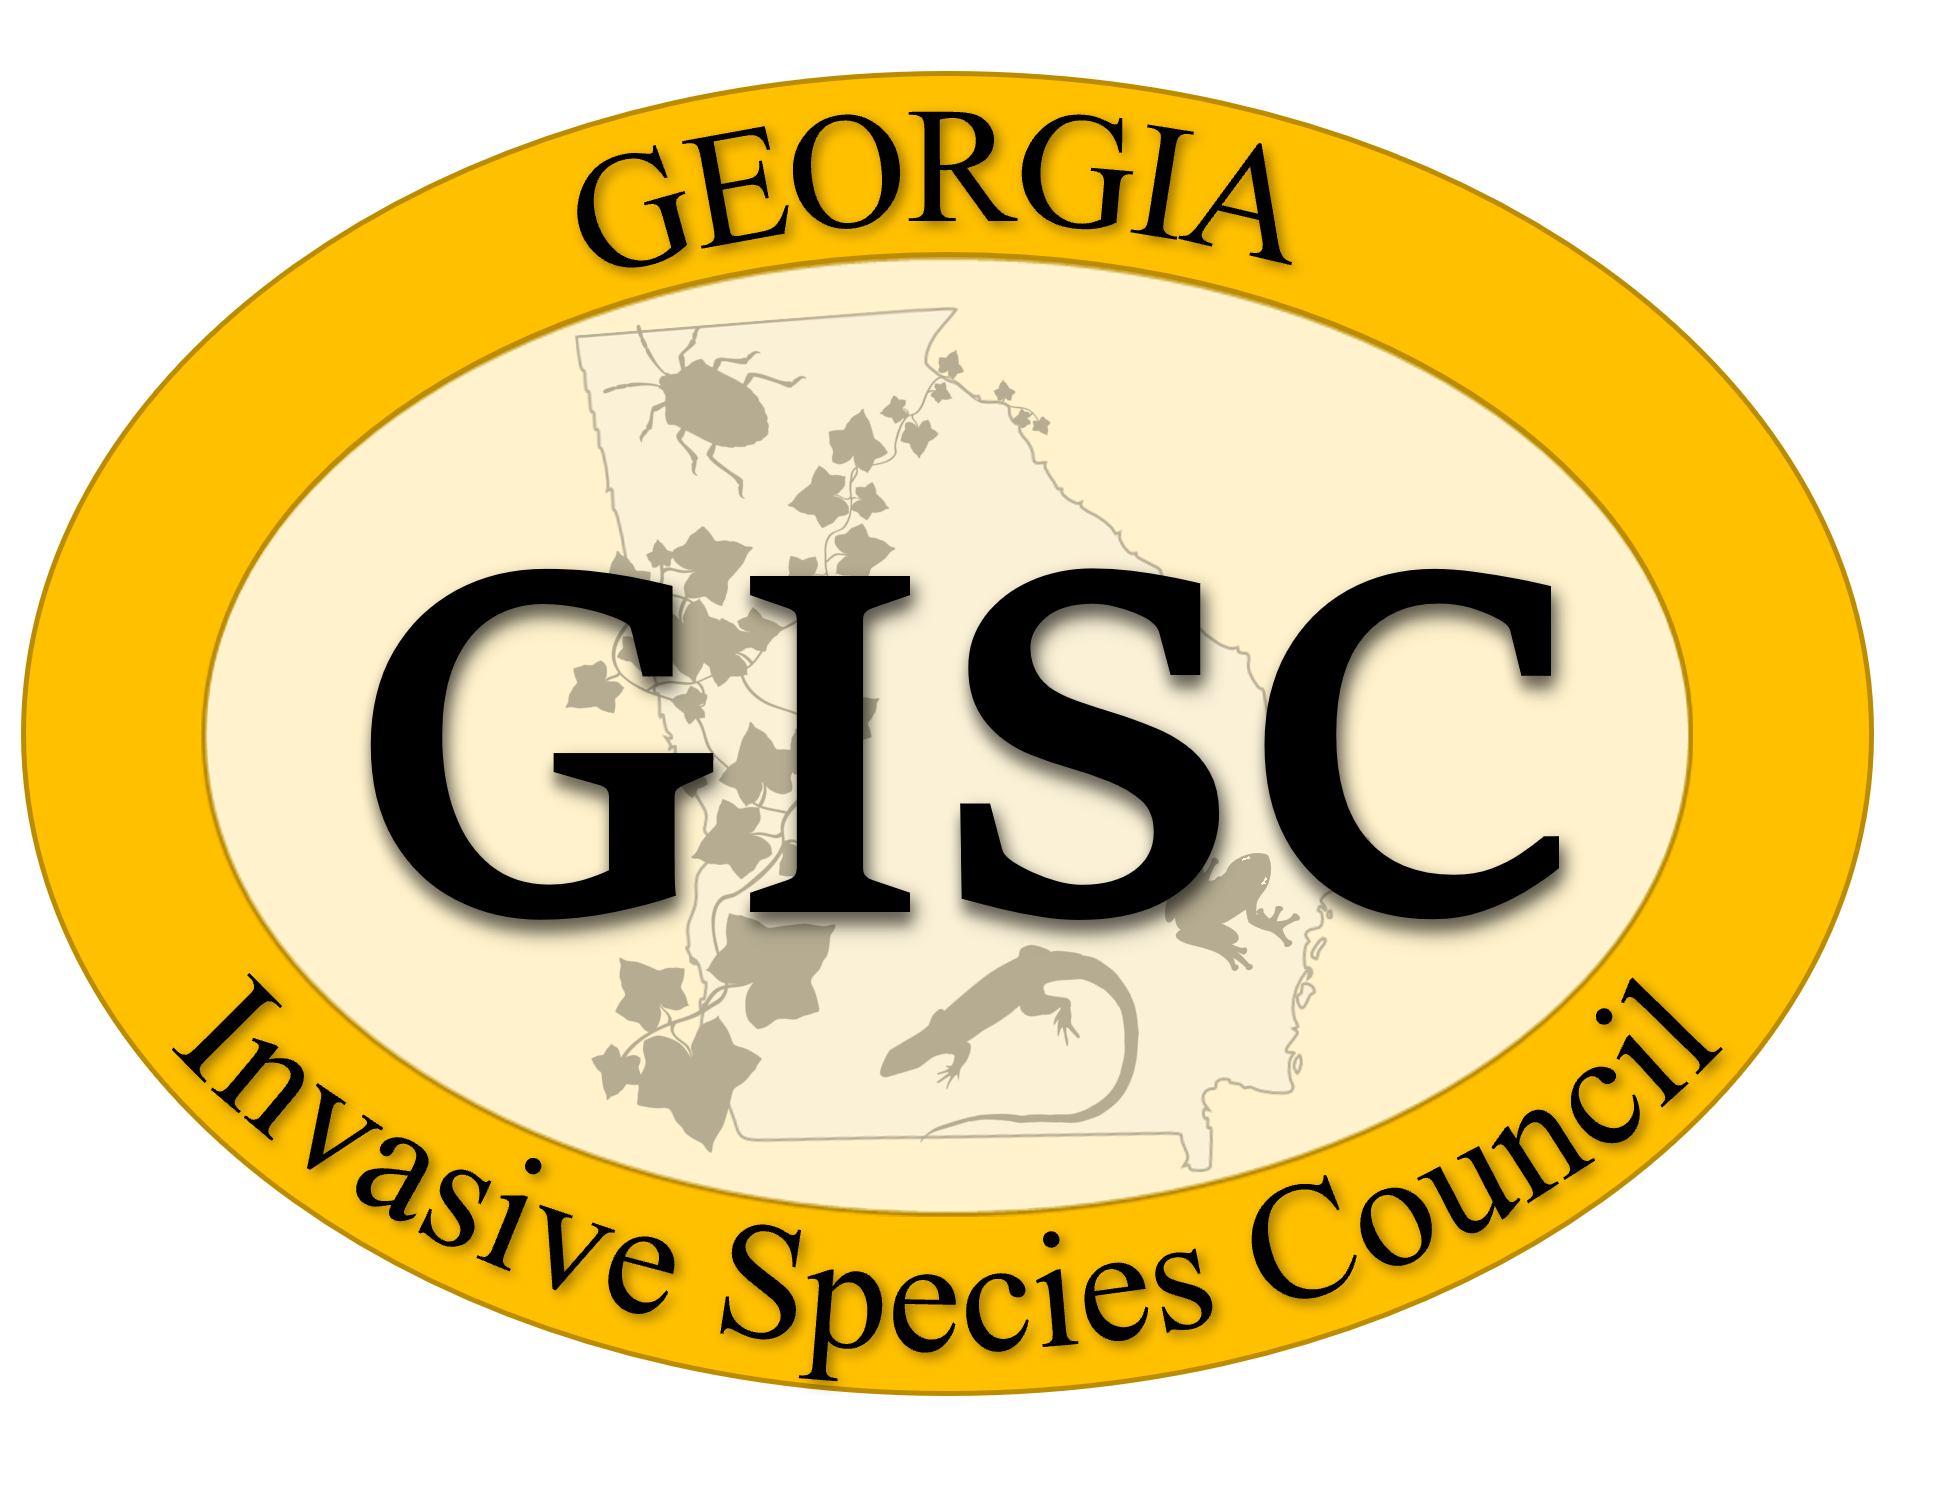 Georgia Invasive Species Council (GISC) Logo. Oval with dark gold outline containing the words "Georgia Invasive Species Council". Inner light gold oval containing a state of Georgia outline with English ivy, Cuban treefrog, tegu, and stink bug silhouettes, and the letters "GISC"